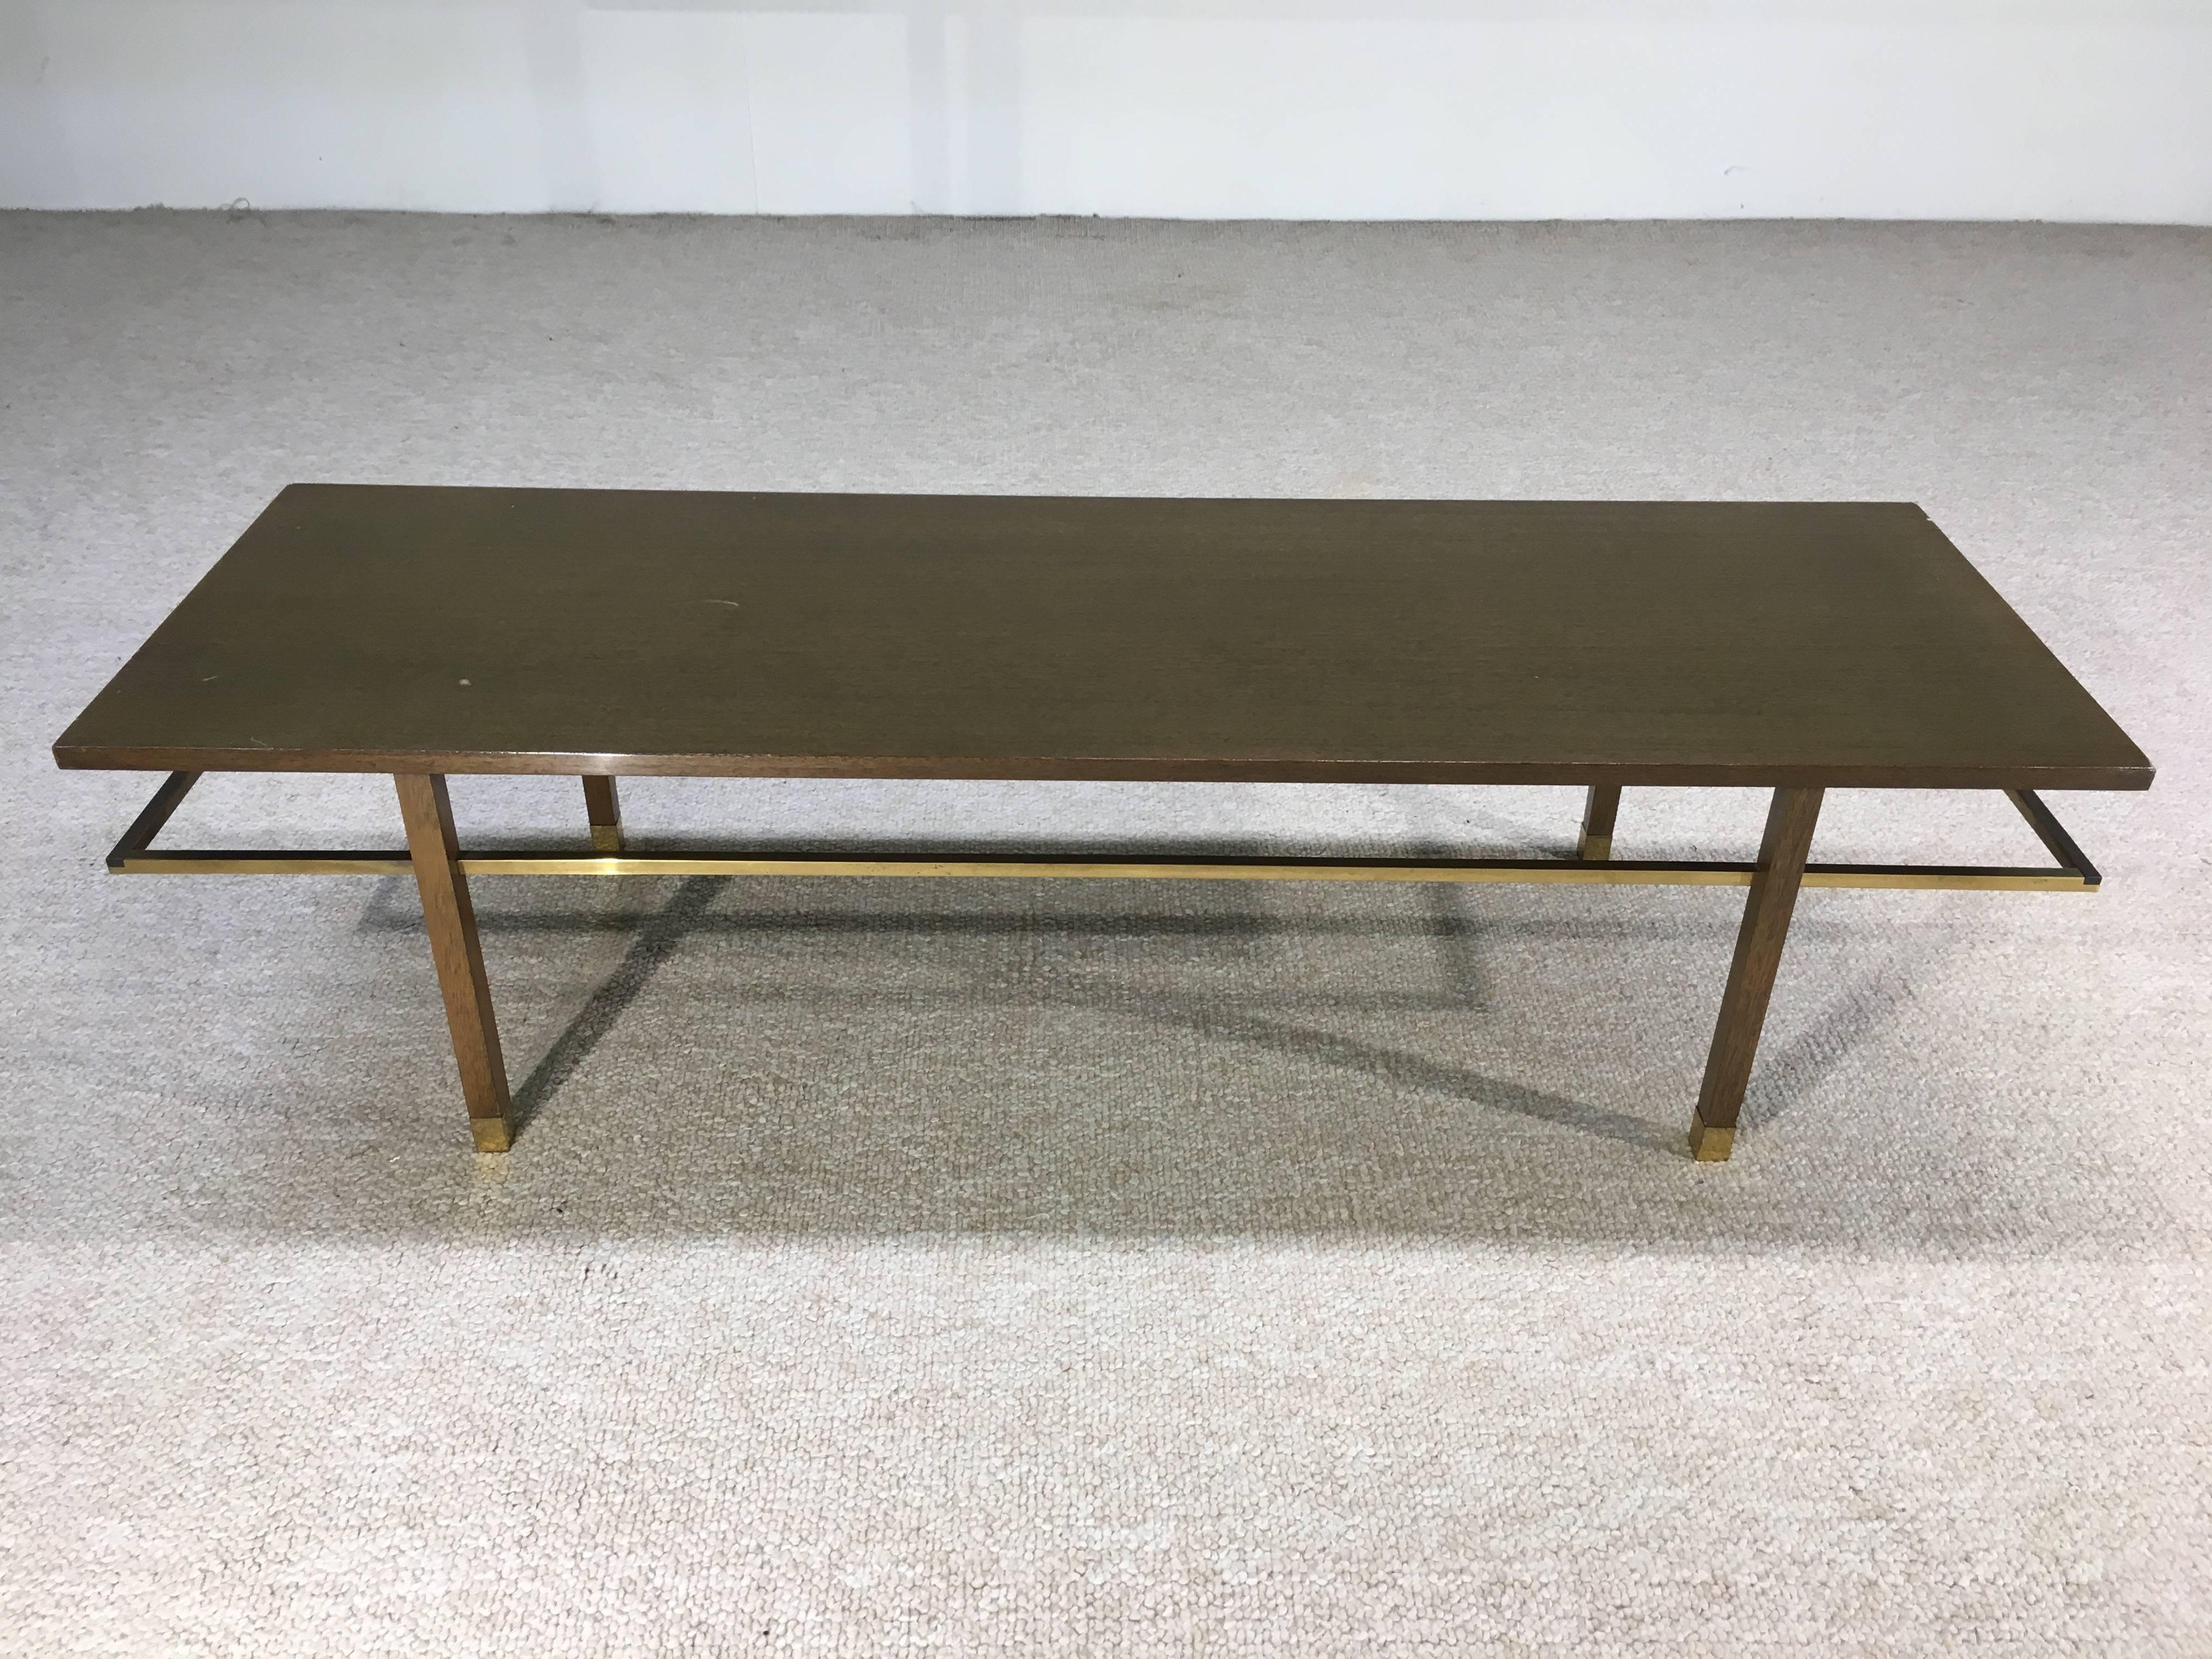 Beautiful 1950s Harvey Probber bench that can also be used as a coffee table. A stunning early example of some of Probber's best design.